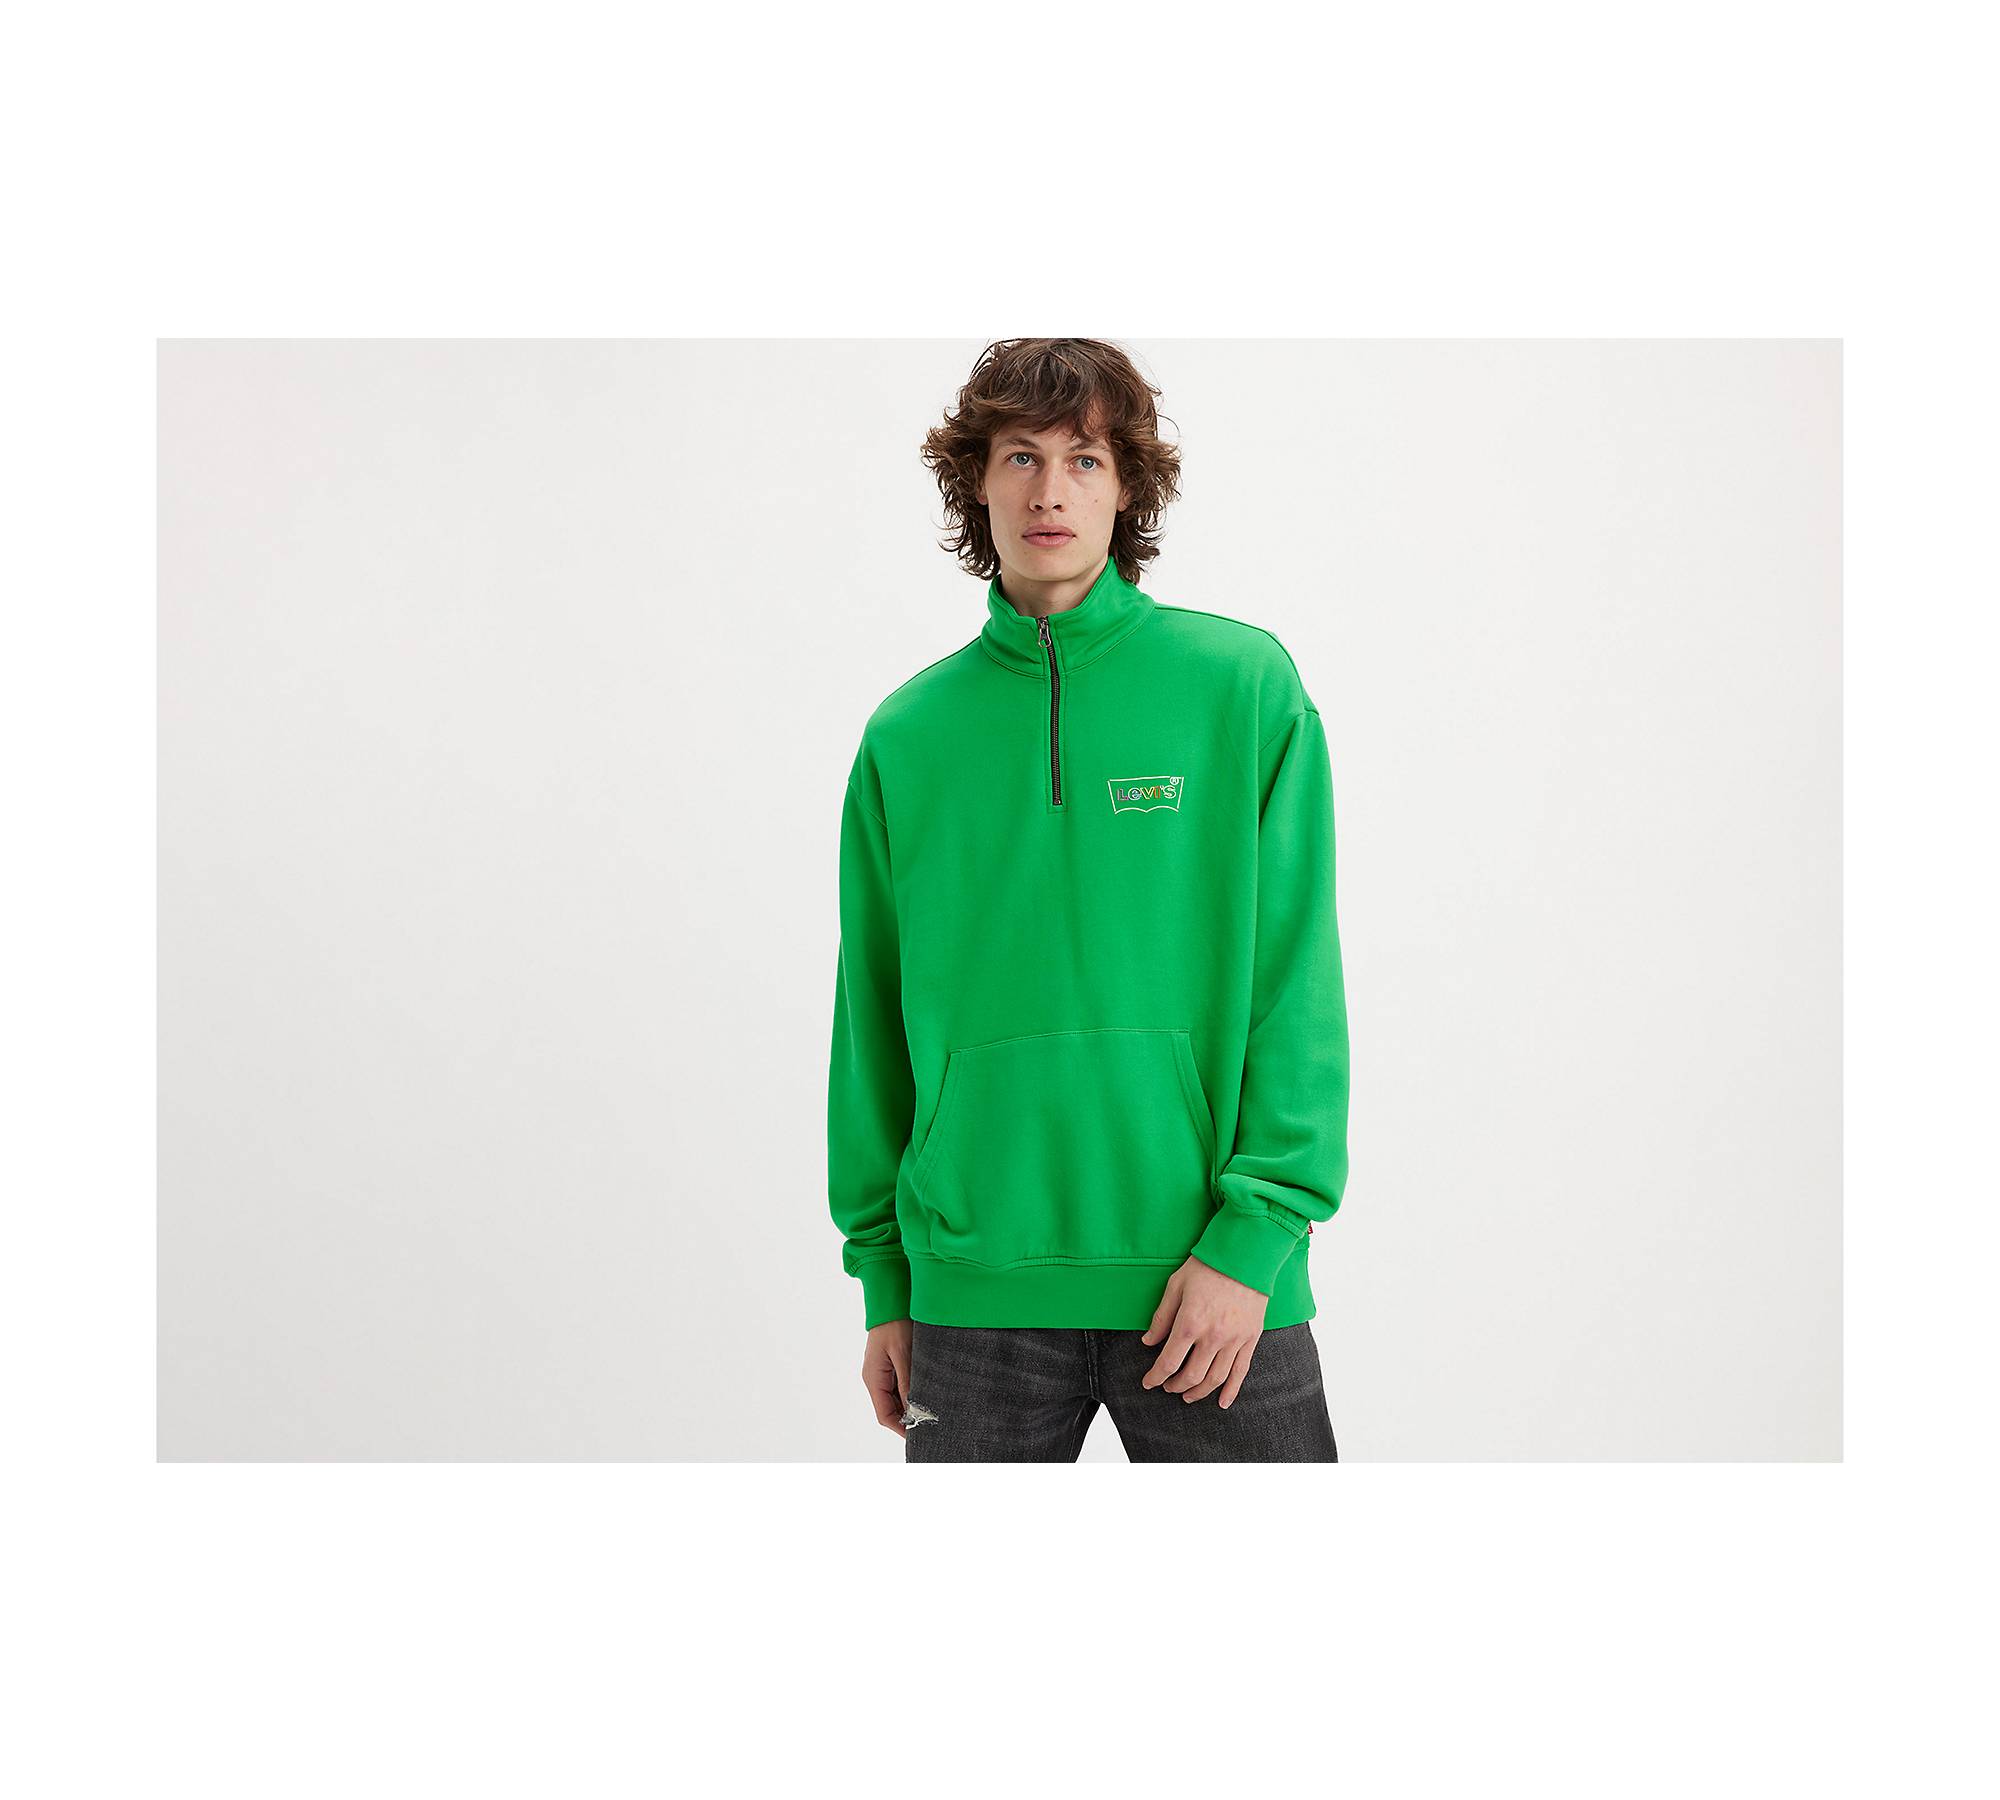 Relaxed Fit Graphic 1/4 Zip Sweatshirt - Green | Levi's® CA